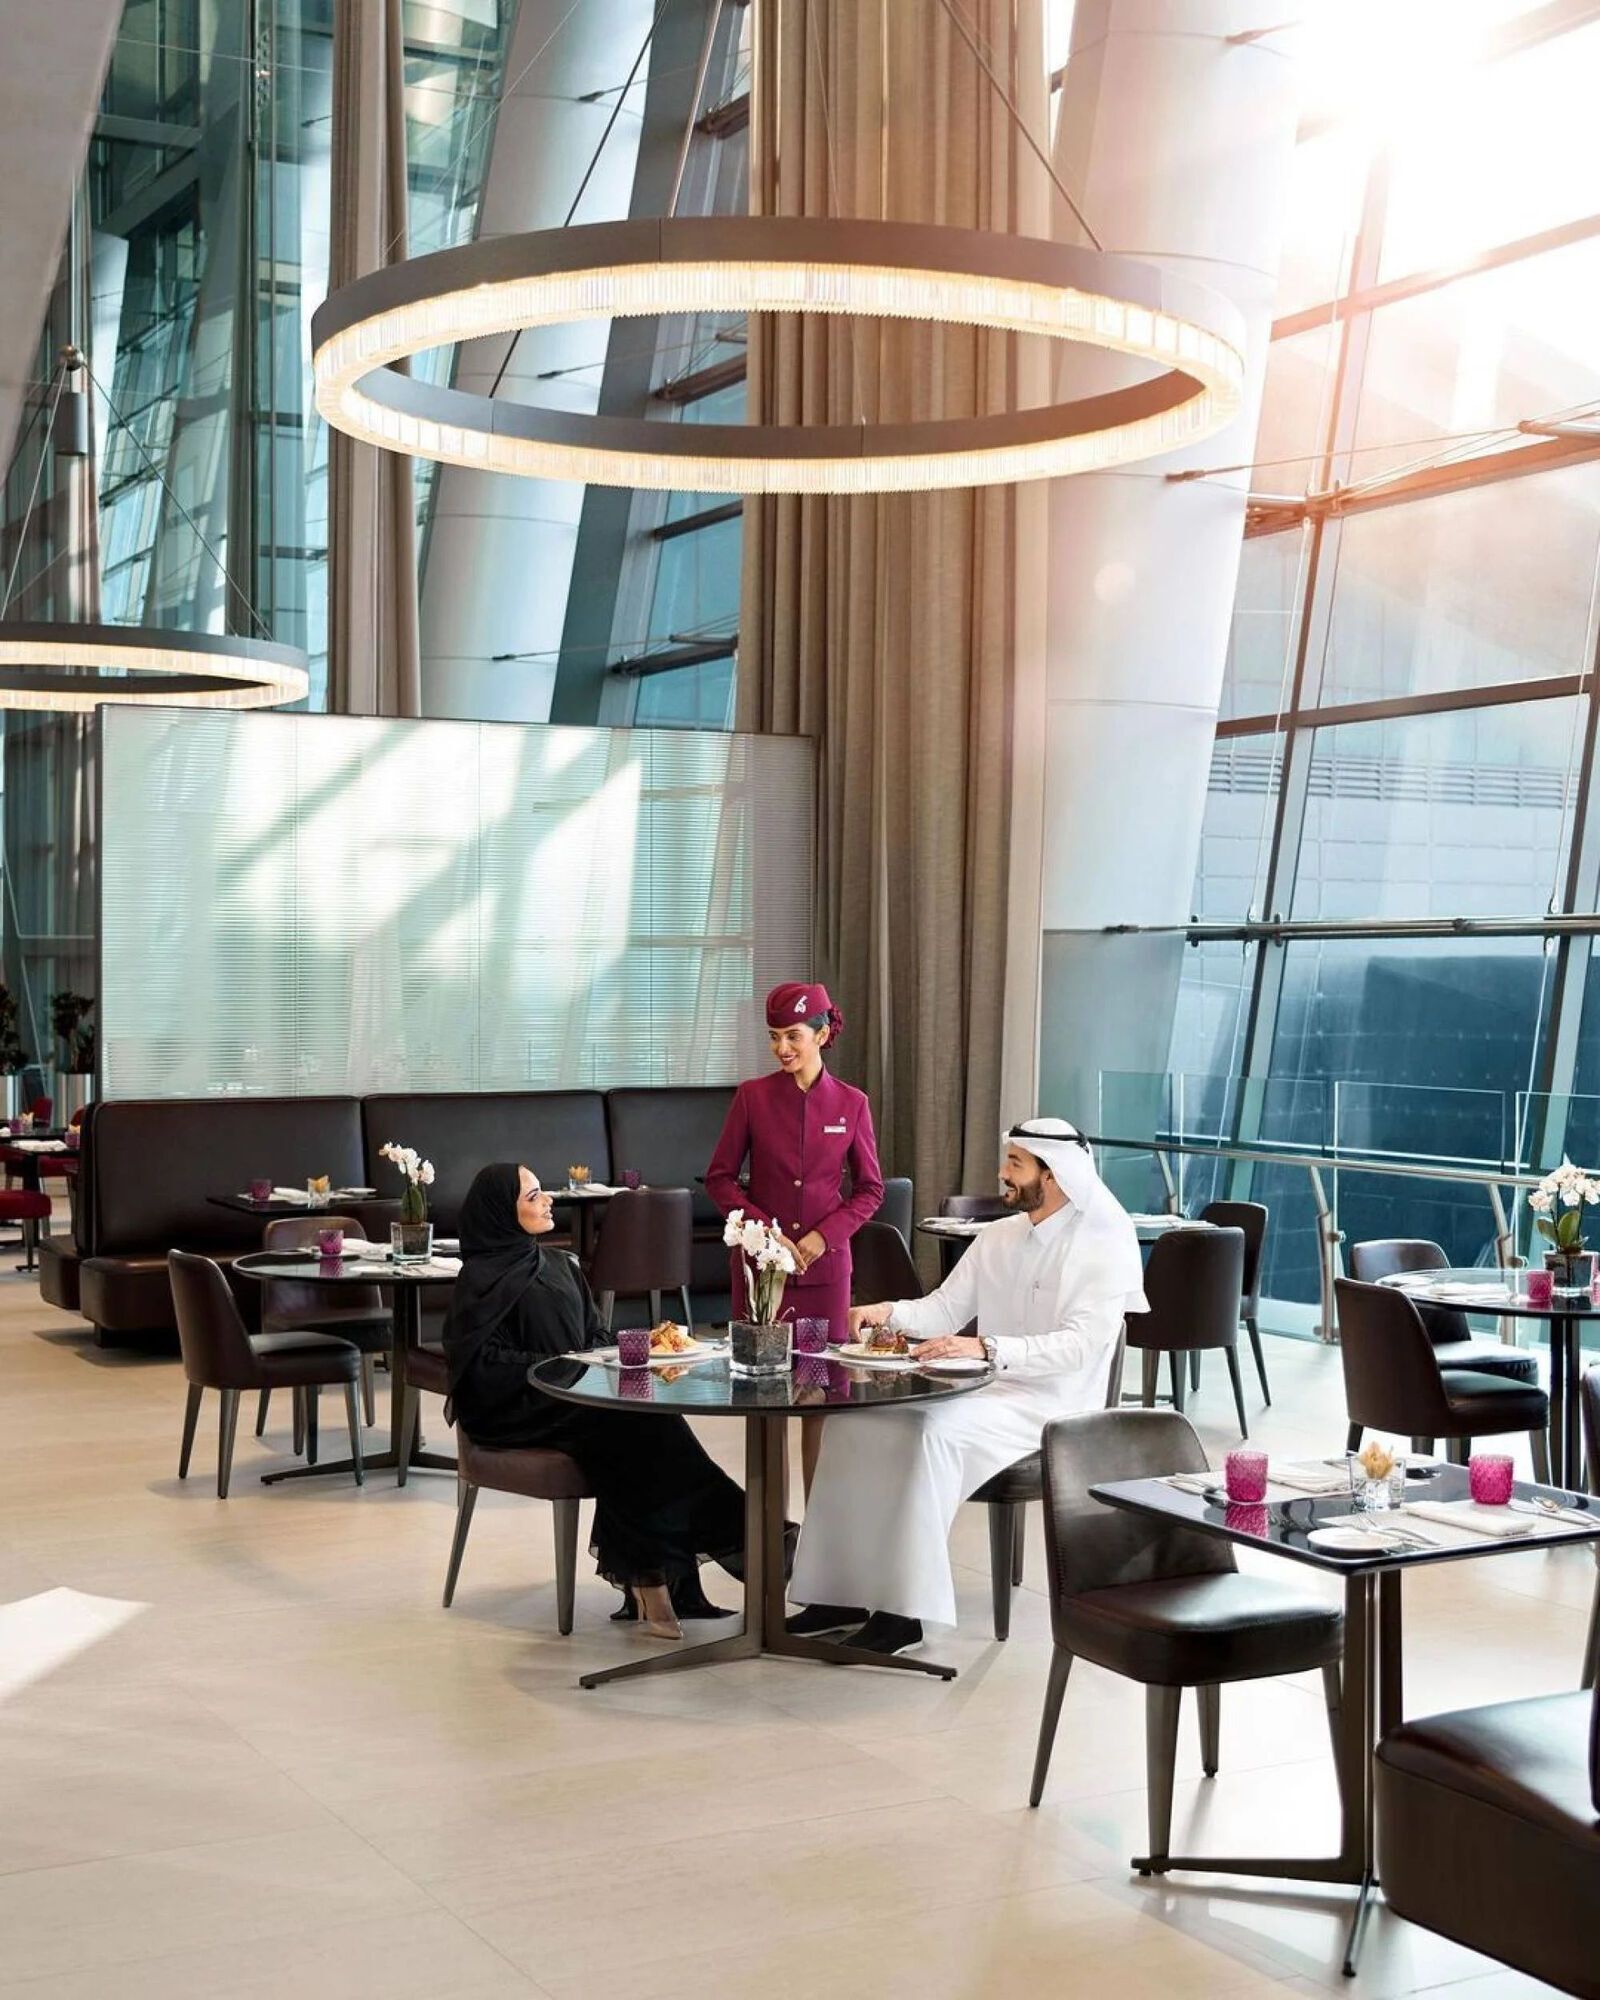 Spa centers, private lounges, gourmet dining: 7 of the most luxurious airport lounges for luxury travelers